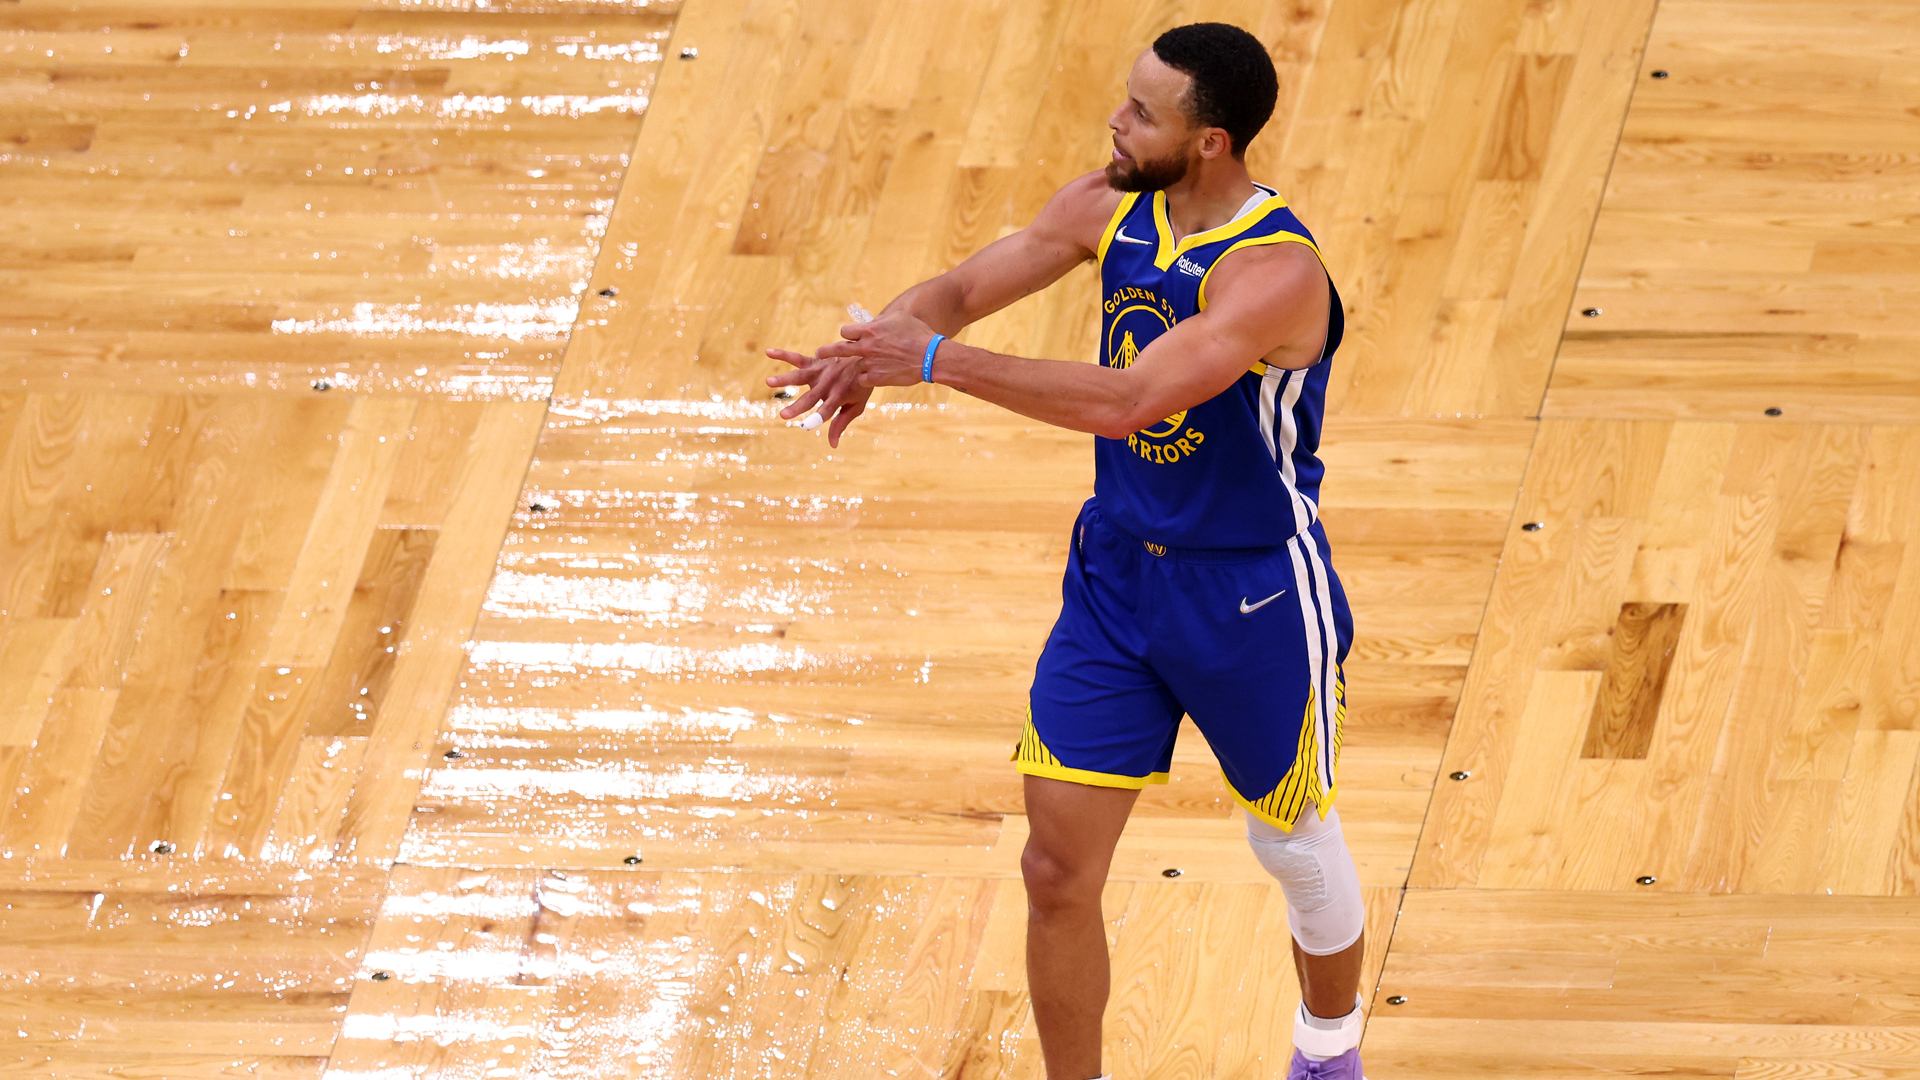 What 3-point records don't already belong to Steph Curry?